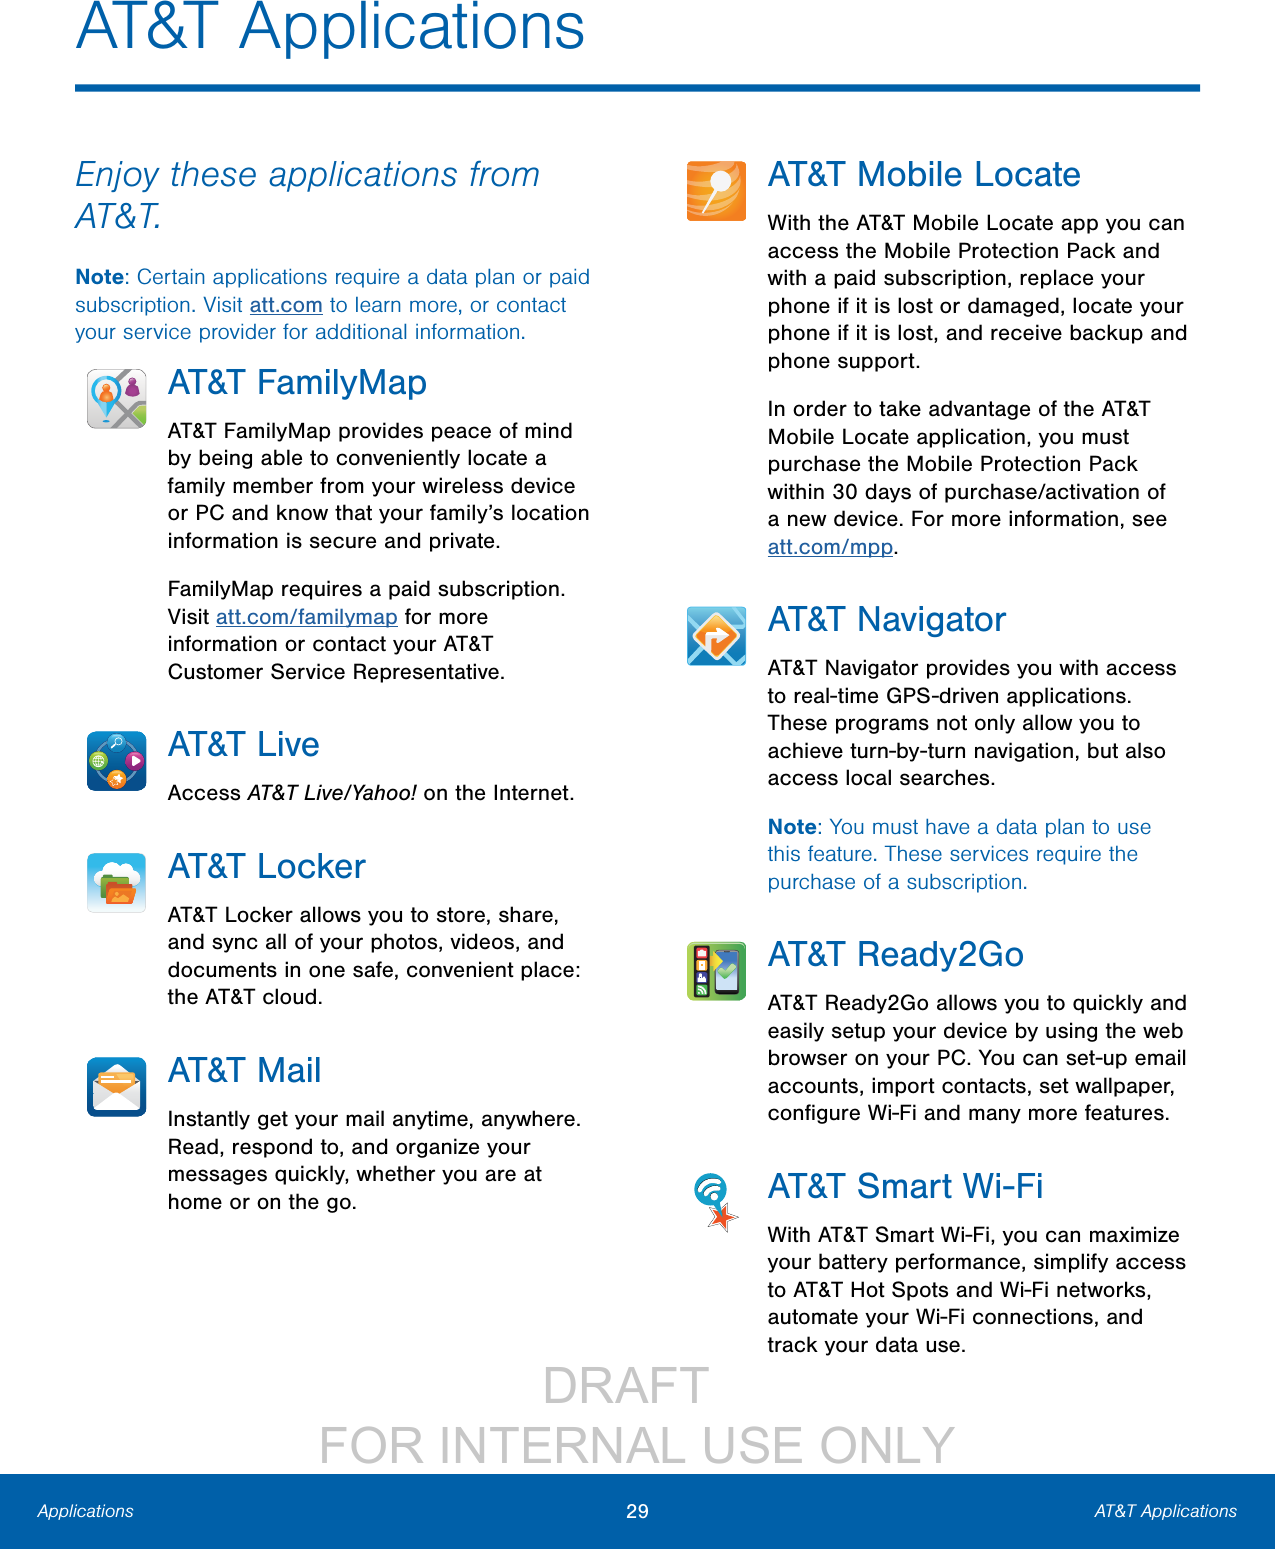                 DRAFT FOR INTERNAL USE ONLY29 AT&amp;T ApplicationsApplicationsAT&amp;T ApplicationsEnjoy these applications from AT&amp;T.Note: Certain applications require a data plan or paid subscription. Visit att.com to learn more, or contact your service provider for additional information.AT&amp;T FamilyMapAT&amp;T FamilyMap provides peace of mind by being able to conveniently locate a family member from your wireless device or PC and know that your family’s location information is secure and private.FamilyMap requires a paid subscription. Visit att.com/familymap for more information or contact your AT&amp;T Customer Service Representative.AT&amp;T LiveAccess AT&amp;T Live/Yahoo! on the Internet.AT&amp;T LockerAT&amp;T Locker allows you to store, share, and sync all of your photos, videos, and documents in one safe, convenient place: the AT&amp;T cloud.AT&amp;T MailInstantly get your mail anytime, anywhere. Read, respond to, and organize your messages quickly, whether you are at home or on the go.AT&amp;T Mobile LocateWith the AT&amp;T Mobile Locate app you can access the Mobile Protection Pack and with a paid subscription, replace your phone if it is lost or damaged, locate your phone if it is lost, and receive backup and phone support.In order to take advantage of the AT&amp;T Mobile Locate application, you must purchase the Mobile Protection Pack within 30 days of purchase/activation of a new device. For more information, see att.com/mpp.AT&amp;T NavigatorAT&amp;T Navigator provides you with access to real-time GPS-driven applications. These programs not only allow you to achieve turn-by-turn navigation, but also access local searches.Note: You must have a data plan to use this feature. These services require the purchase of a subscription.AT&amp;T Ready2GoAT&amp;T Ready2Go allows you to quickly and easily setup your device by using the web browser on your PC. You can set-up email accounts, import contacts, set wallpaper, conﬁgure Wi-Fi and many more features.AT&amp;T Smart Wi-FiWith AT&amp;T Smart Wi-Fi, you can maximize your battery performance, simplify access to AT&amp;T Hot Spots and Wi-Fi networks, automate your Wi-Fi connections, and track your data use.